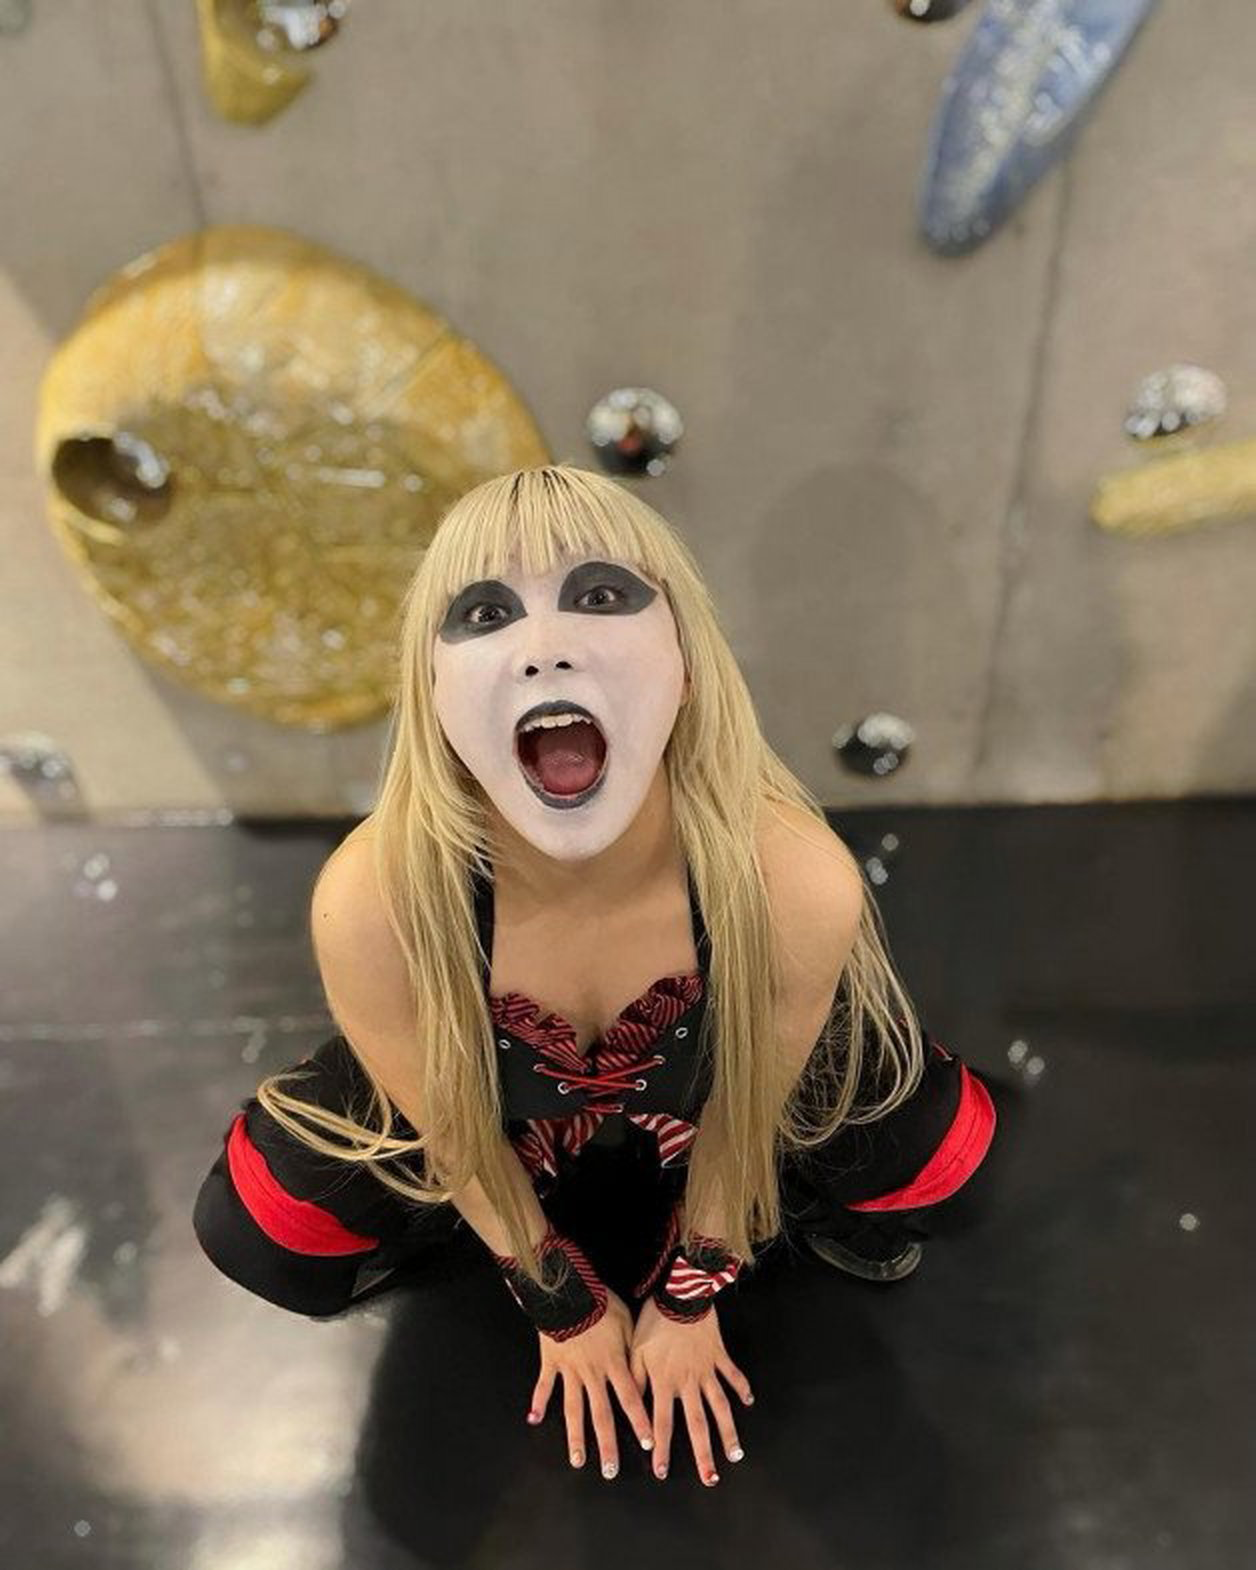 Photo by Ruinedcarpet with the username @Ruinedcarpet,  May 24, 2022 at 1:30 PM. The post is about the topic Women of wrestling and the text says 'Ram Kaichow.

#RamKaichow #Cute #Joshi #RamKaicho #Asian #ProWrestler #Goth #Japanese #Blonde #Makeup #Squatting #OpenMouth #Gothic #Cutie #JoshiPuroresu #AsianGirl #WomensWrestling #GothGirl #JapaneseGirl #FacePaint #GothicGirl #Cuteness #Beauty..'